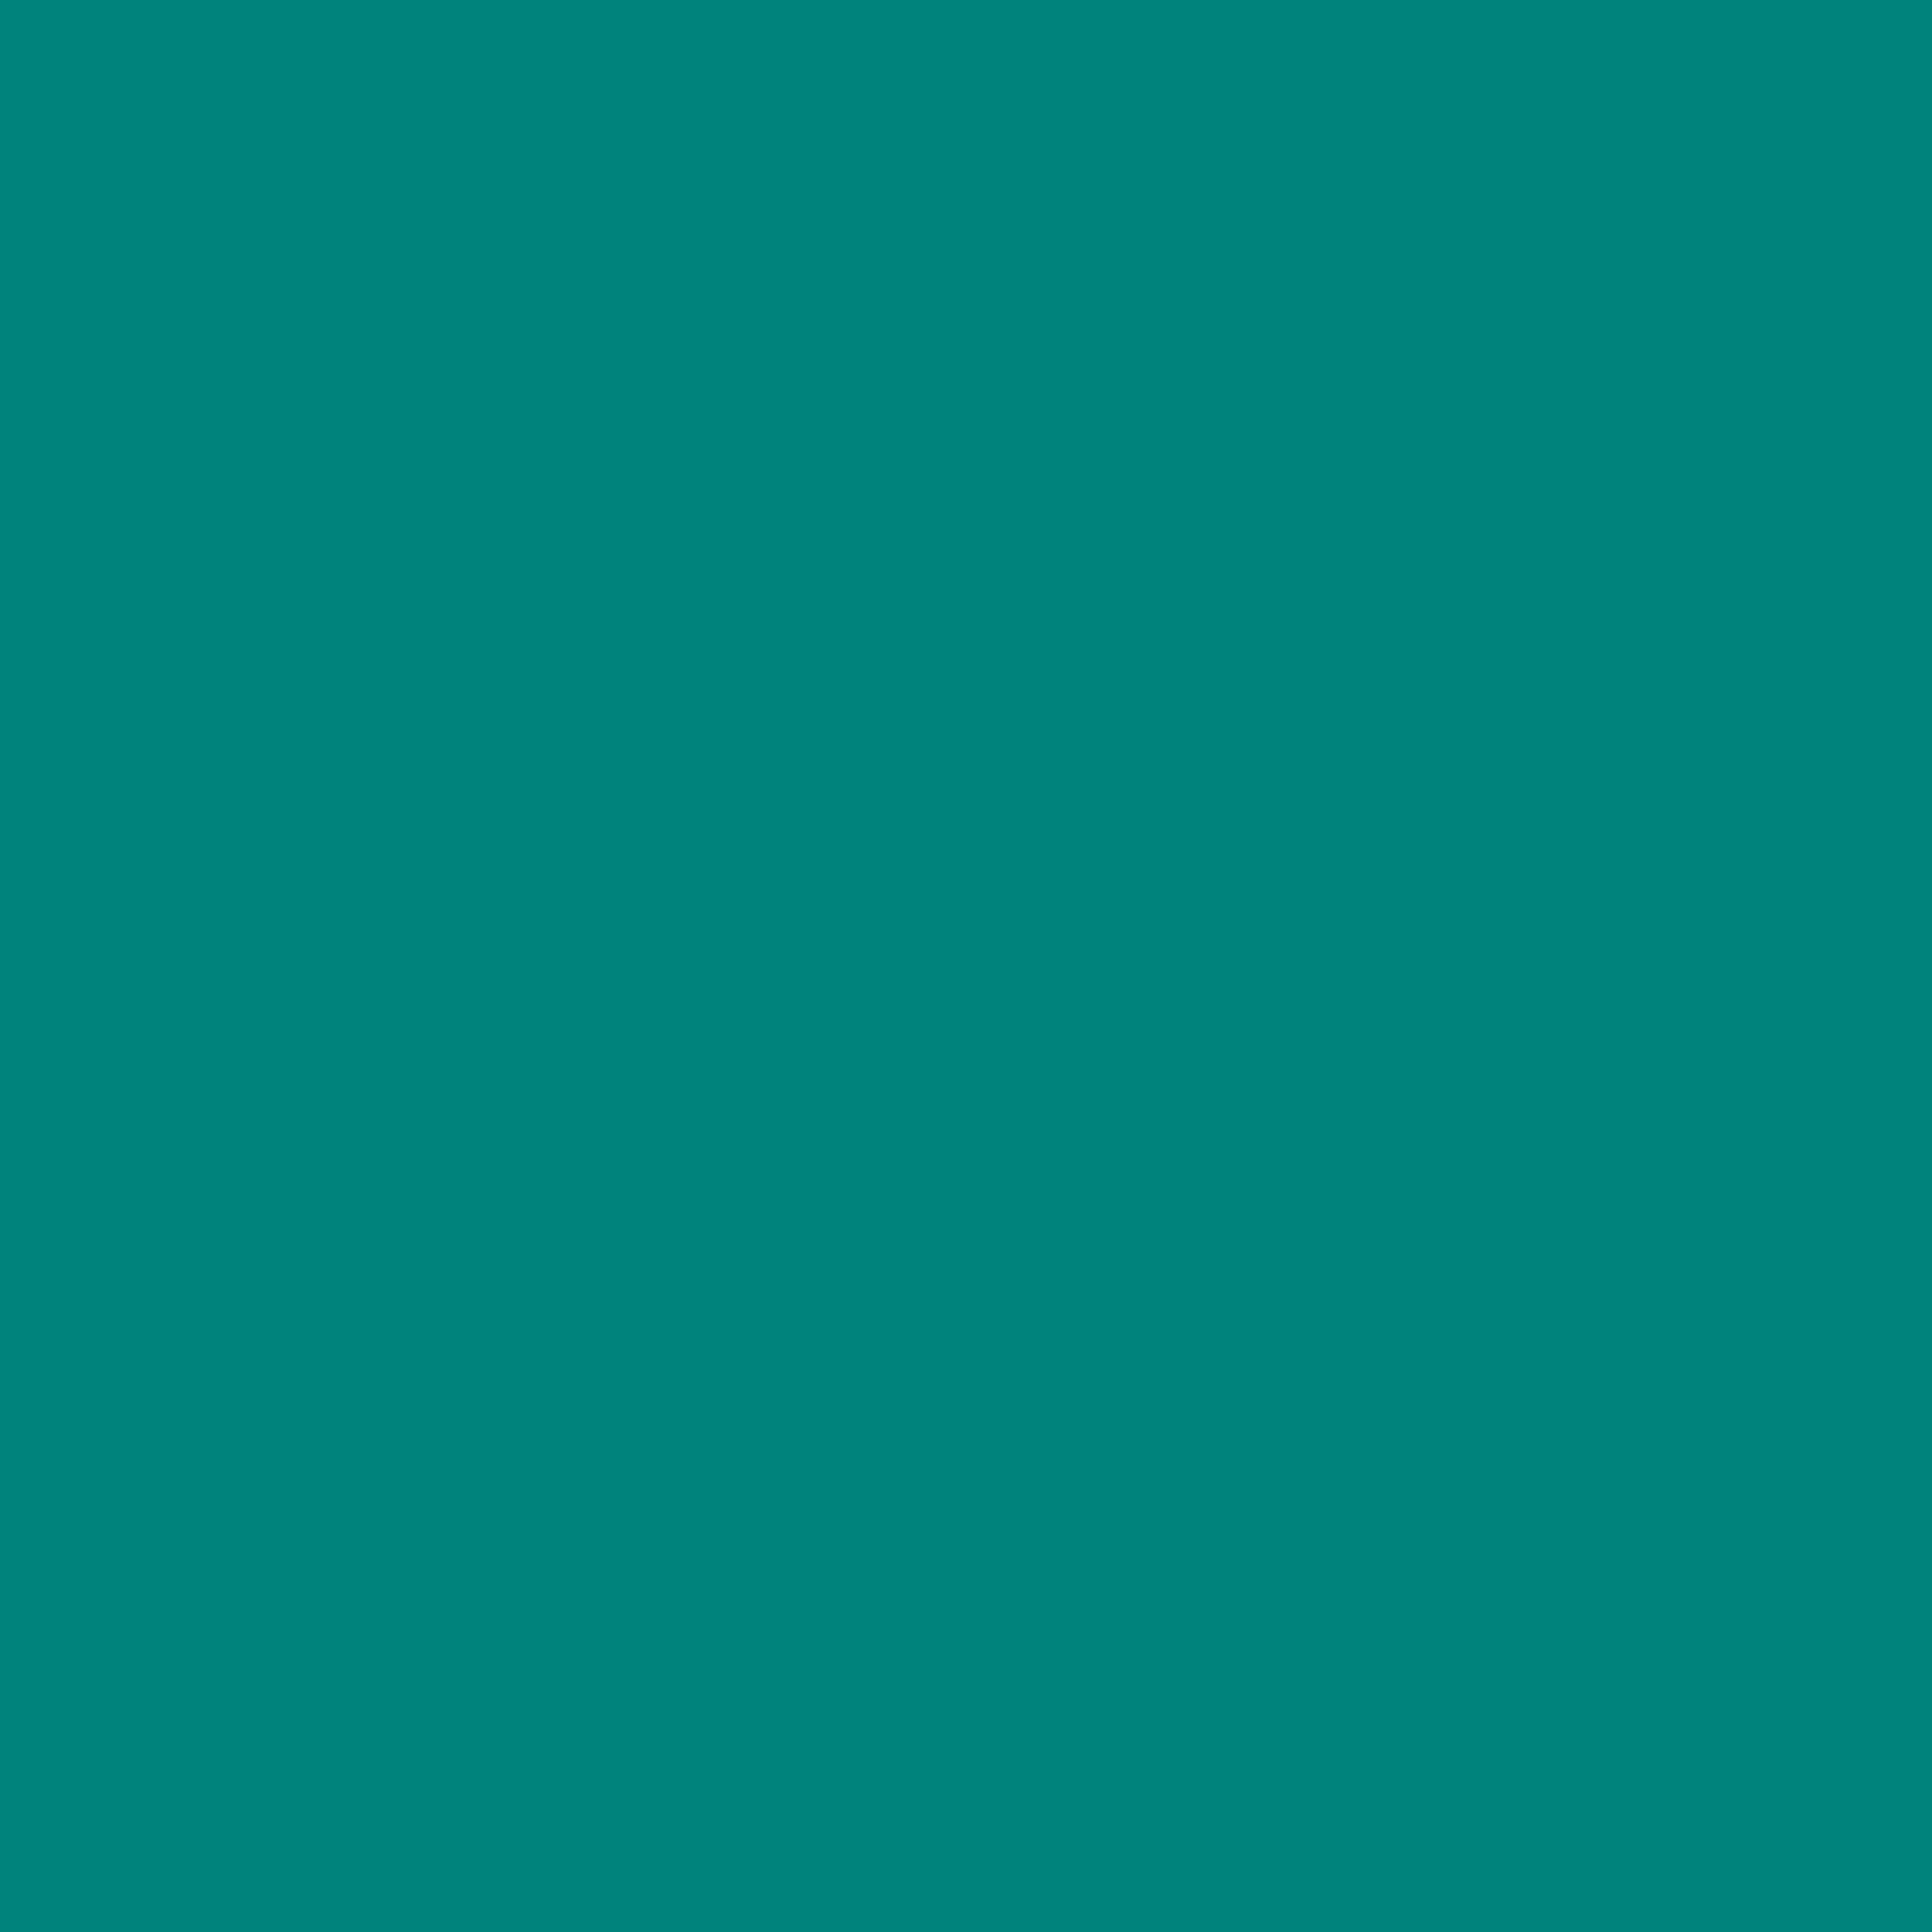 3600x3600 Teal Green Solid Color Background